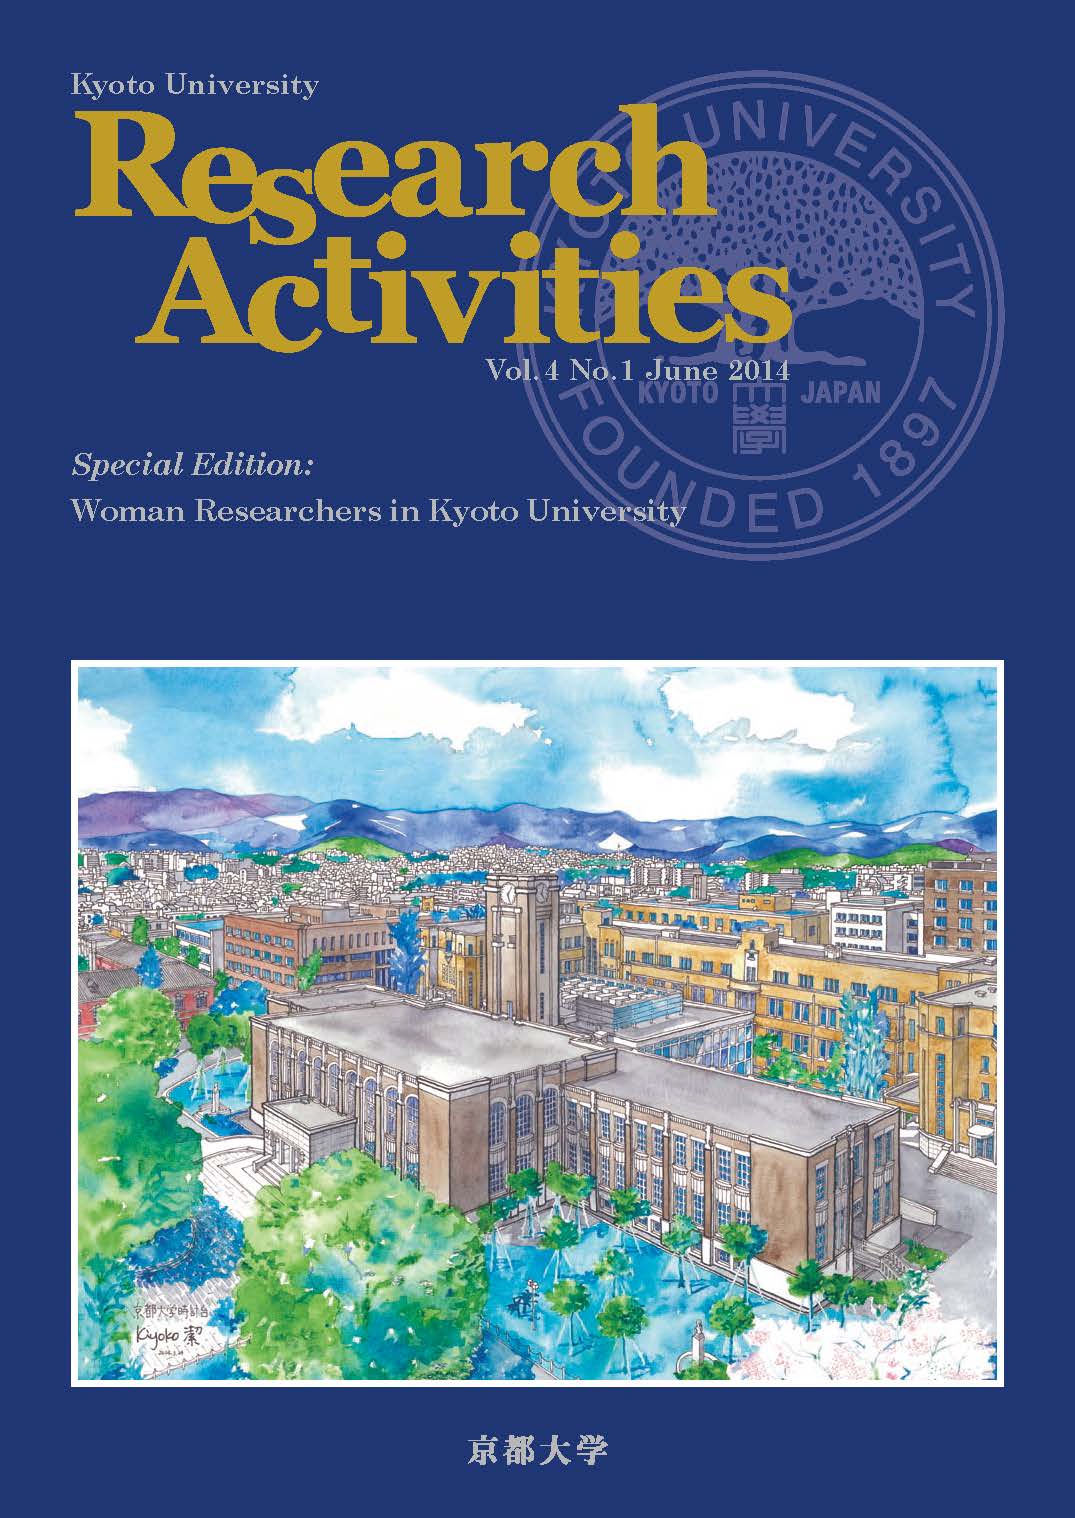 Kyoto University Research Activities Vol.4 No.1 Special Edition: Woman Researchers in Kyoto University – June 2014